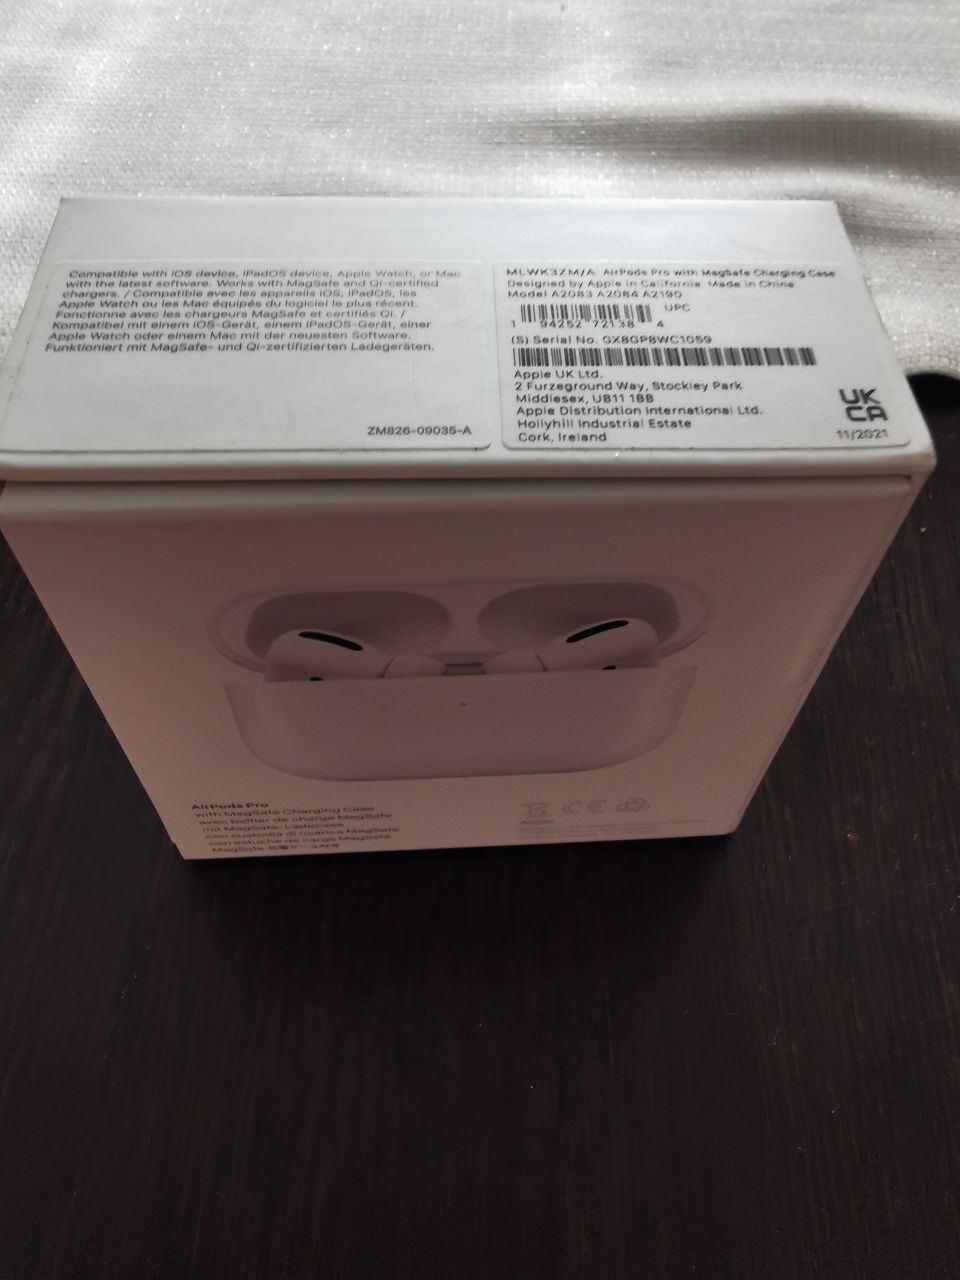 AirPods Pro with pudełko model A2083 A2084 A2190